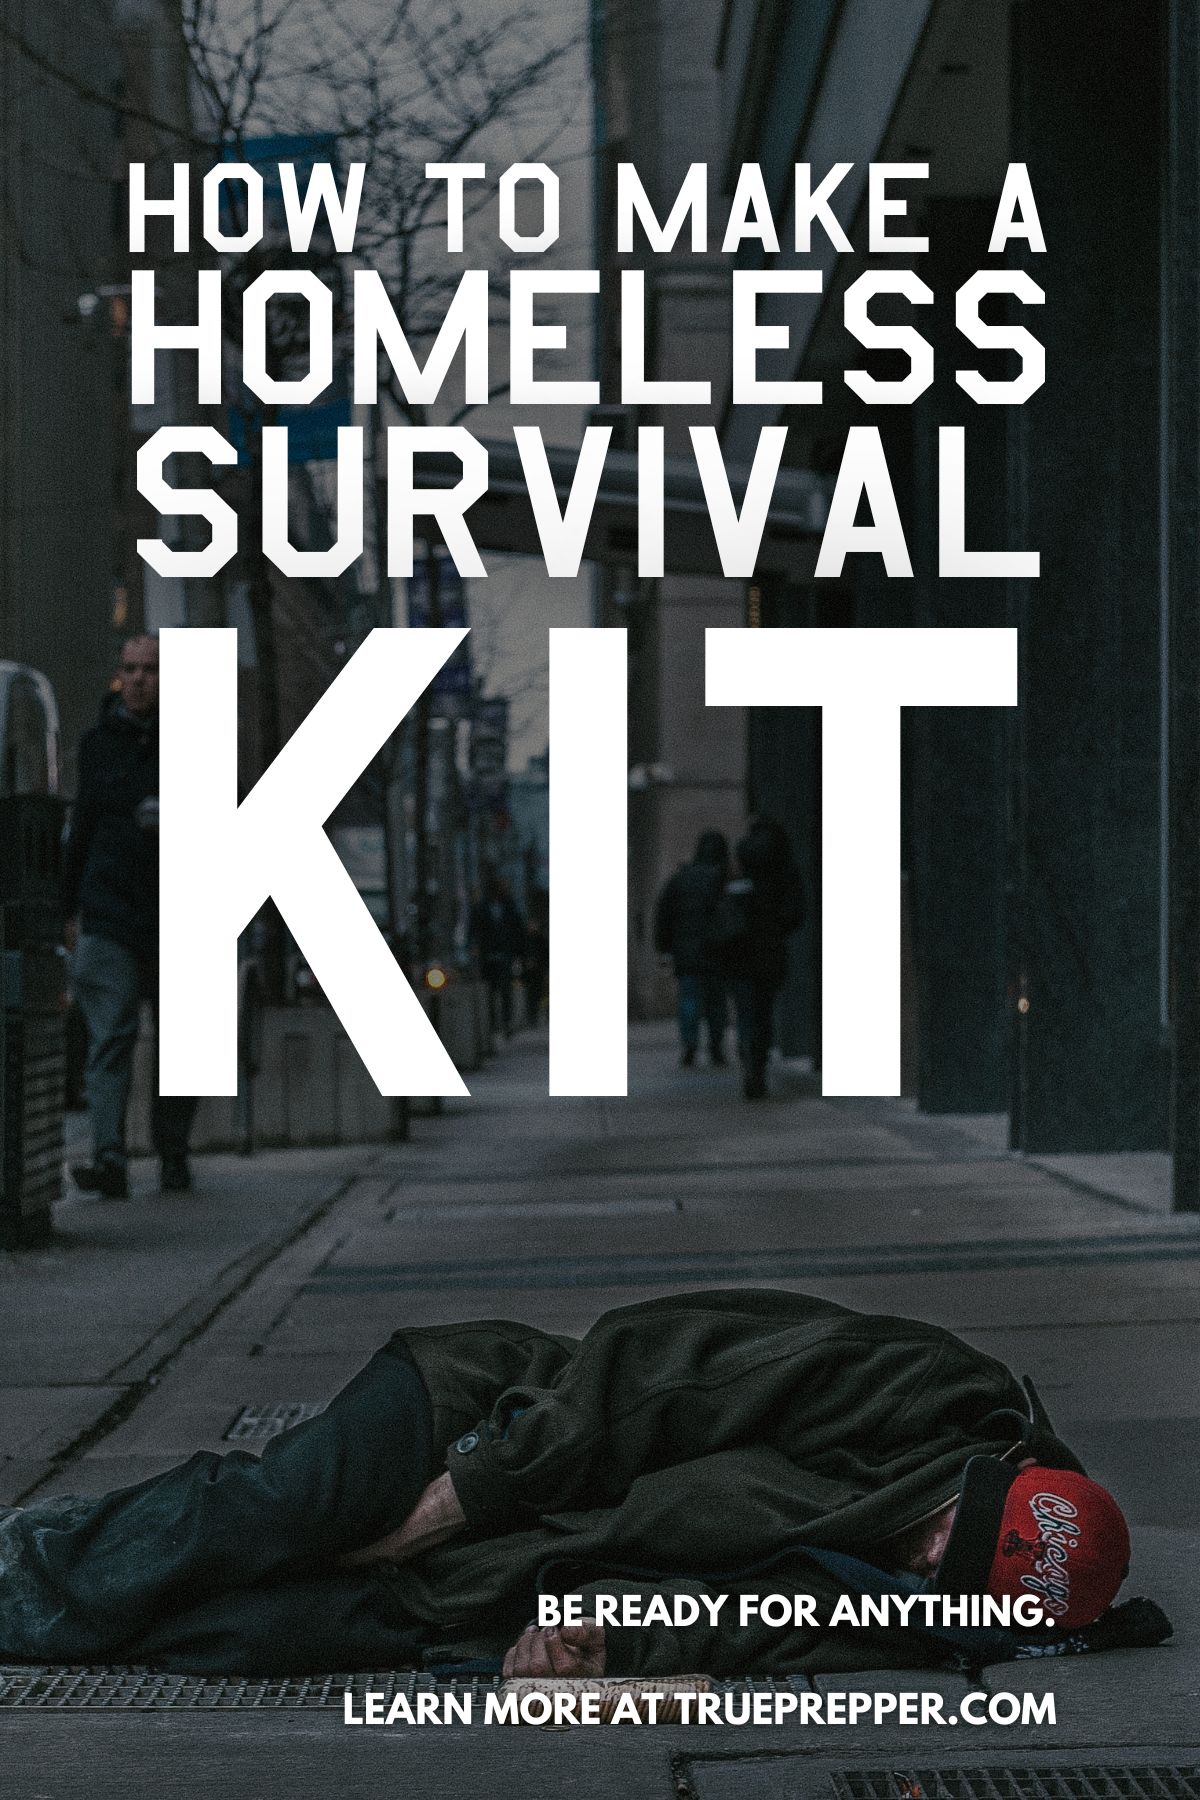 How to Make a Homeless Survival Kit